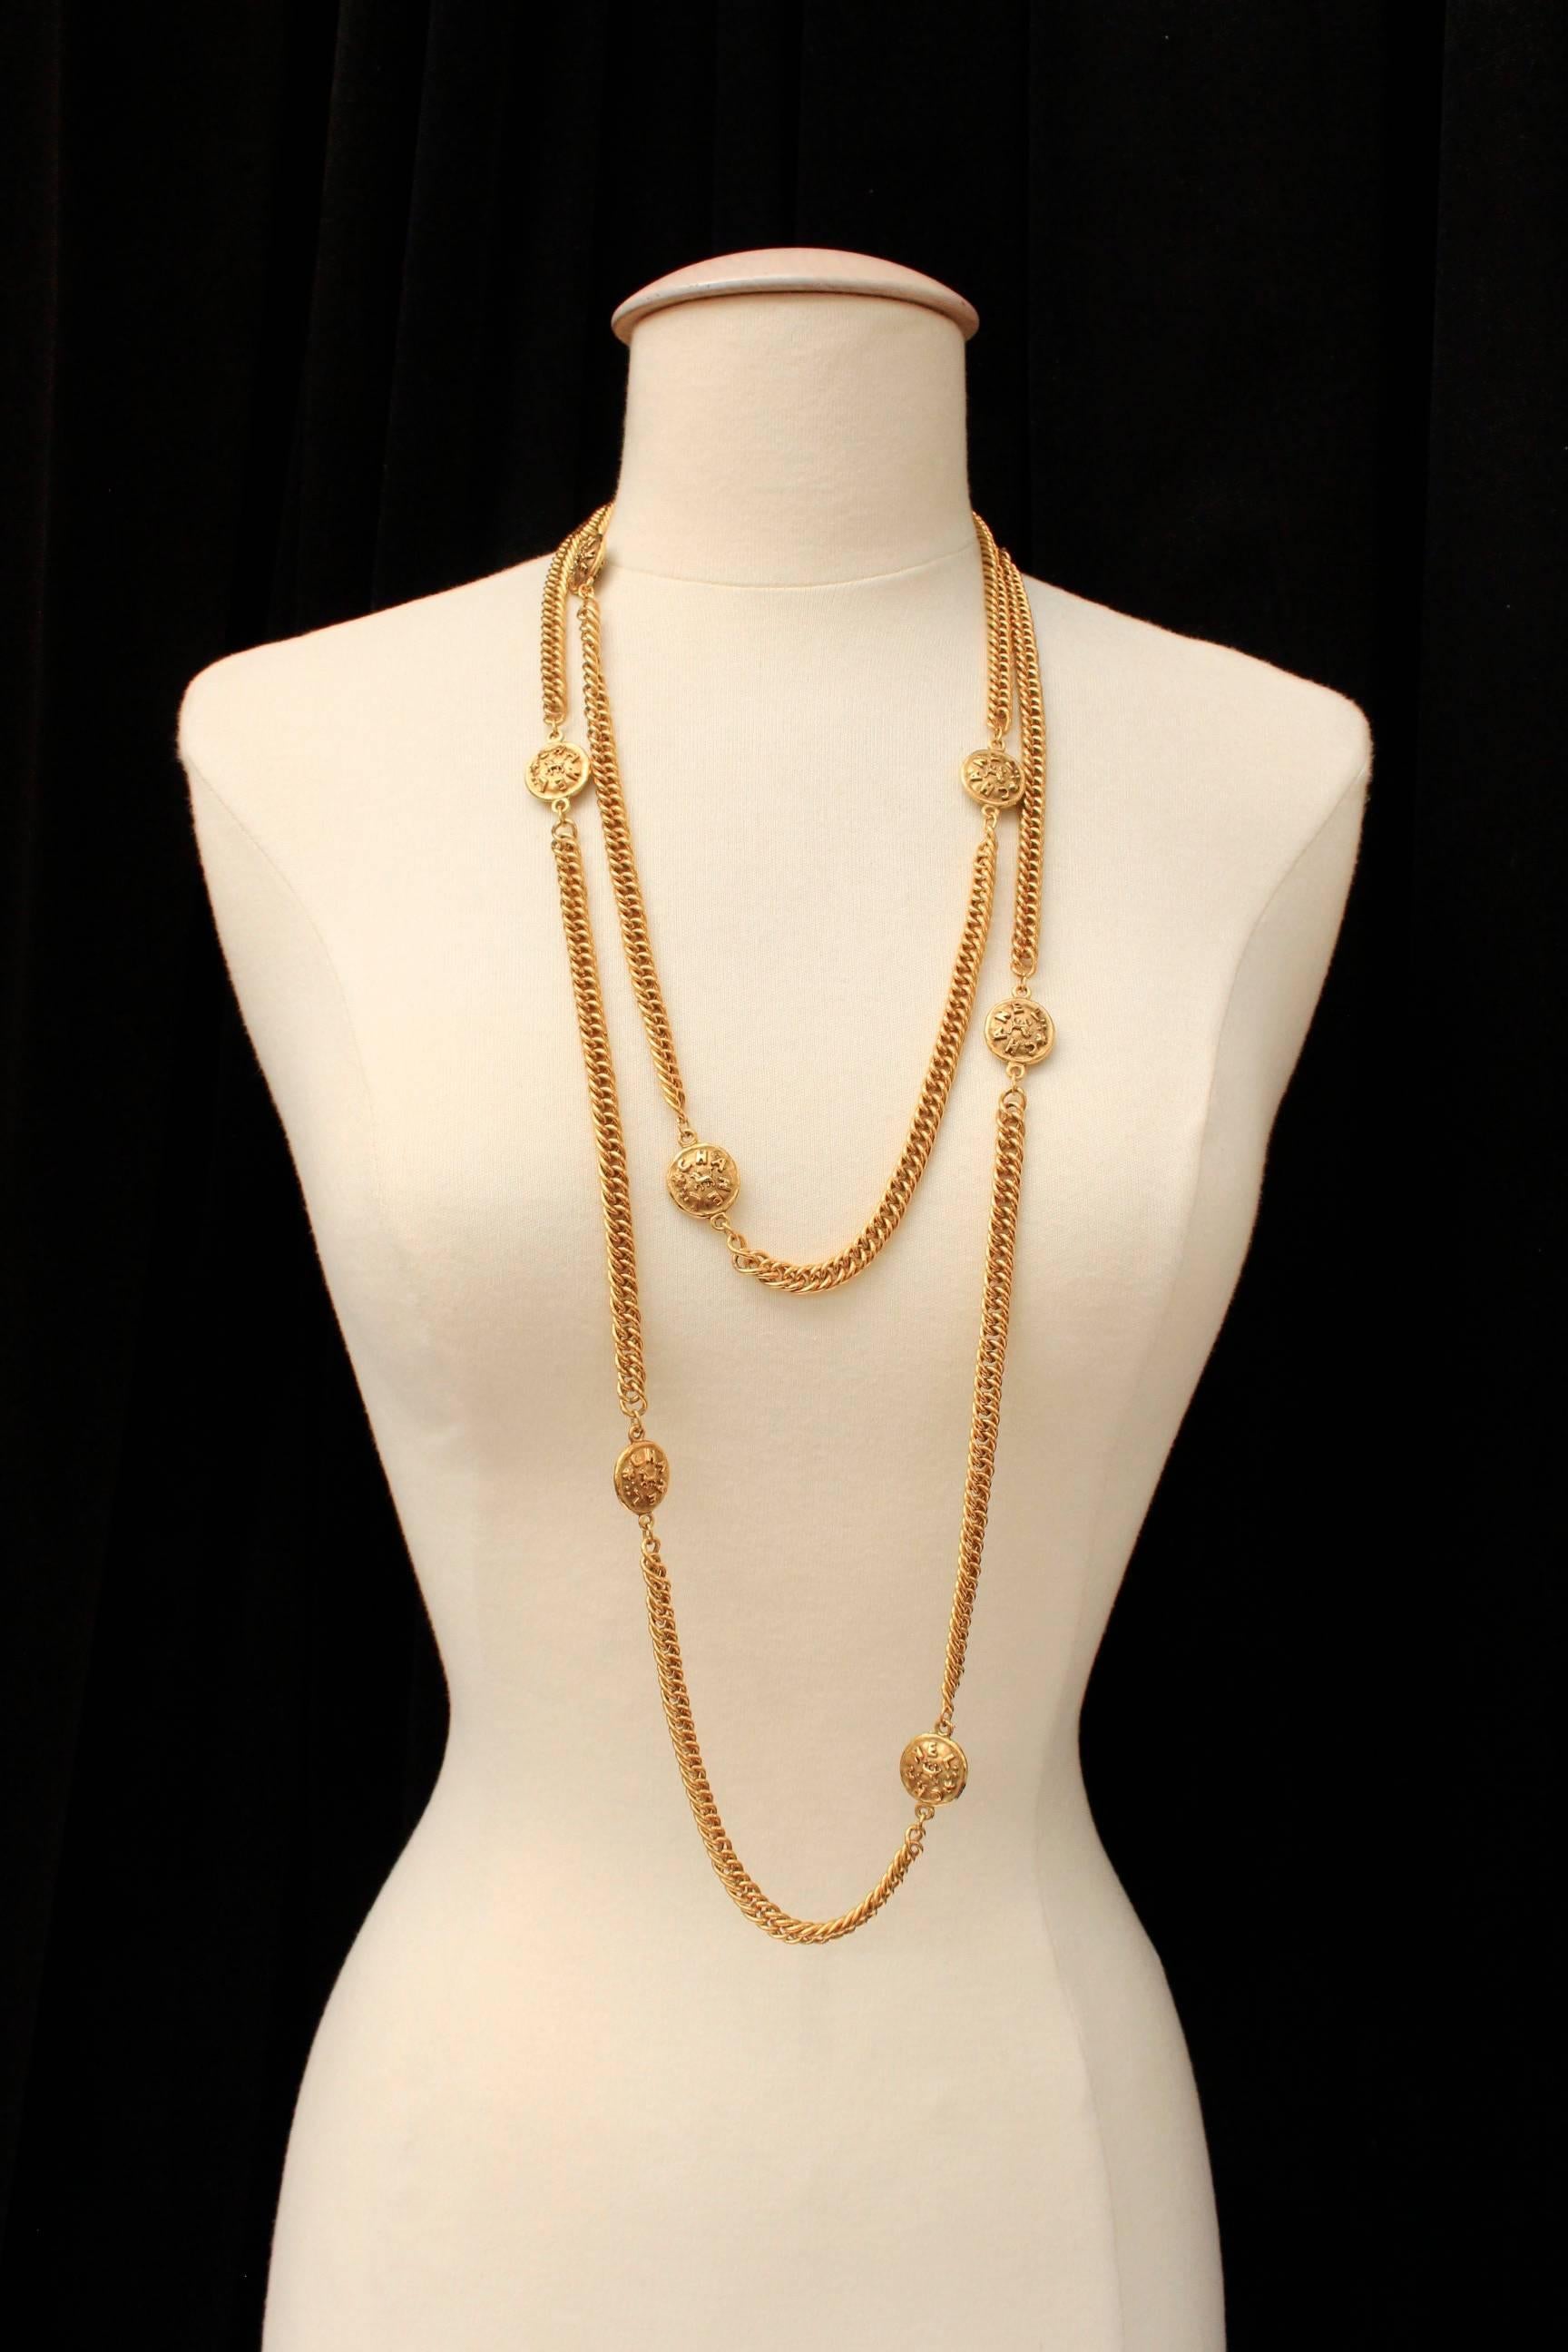 CHANEL (Made in France) Gilt metal long necklace composed of gilt chain alternated with round medals struck with the brand name and a lion silhouette. 

The necklace is signed on plate, collection 2 cc 3 dating from the early 1990s.

Very good